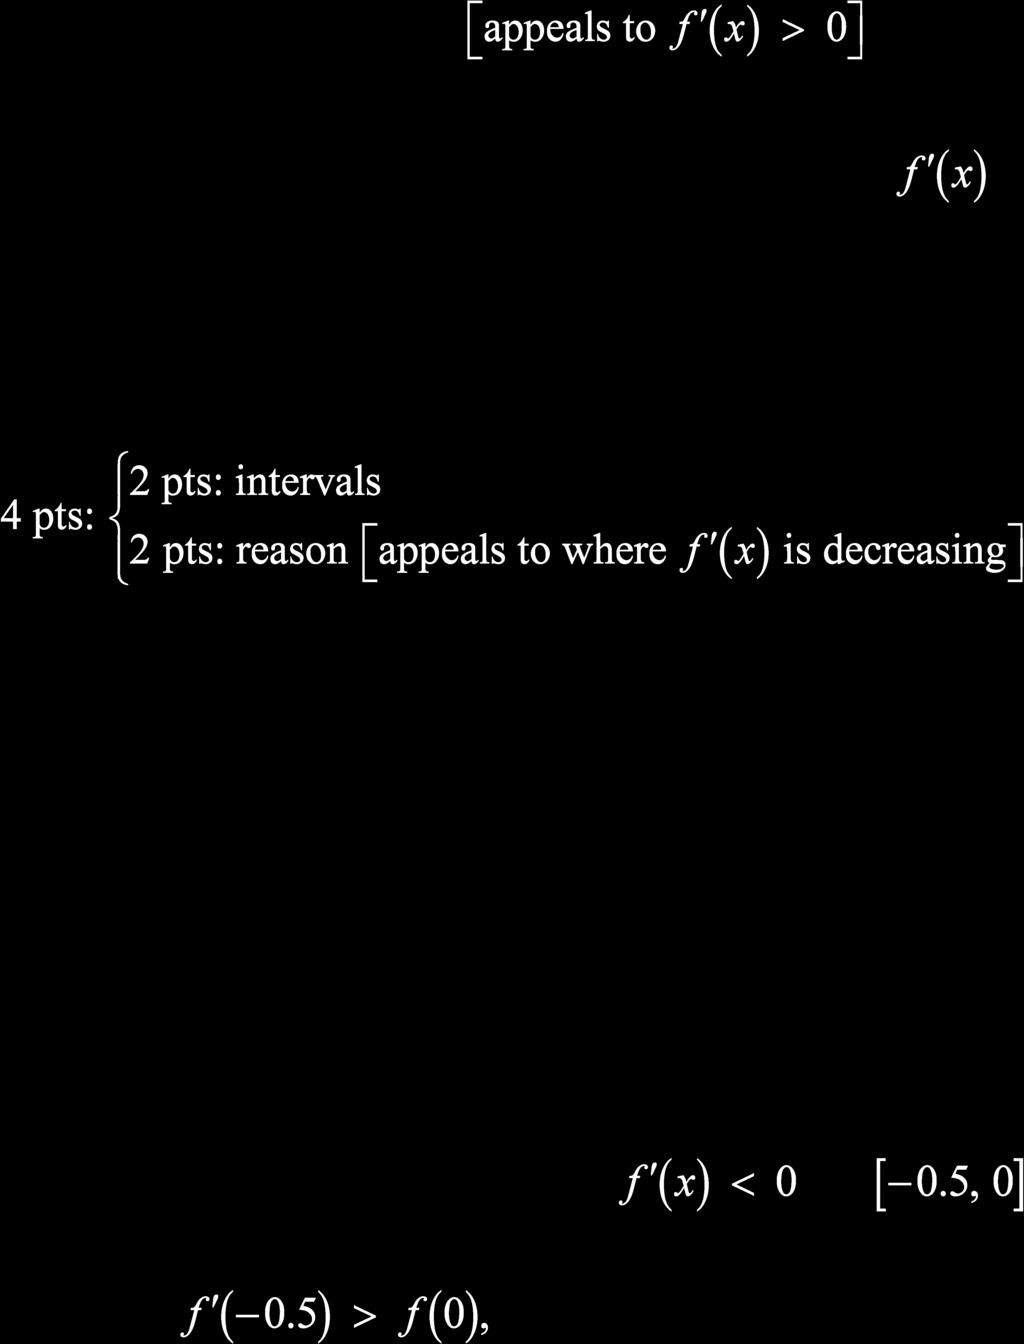 (b) Because f f 0.8 0 and. 0, the graph of f has points of inflection at 0.8.. The graph of f is decreasing when and < < 0.8 and >., so the graph of f is concave downward on (, 0.8) and (., ).